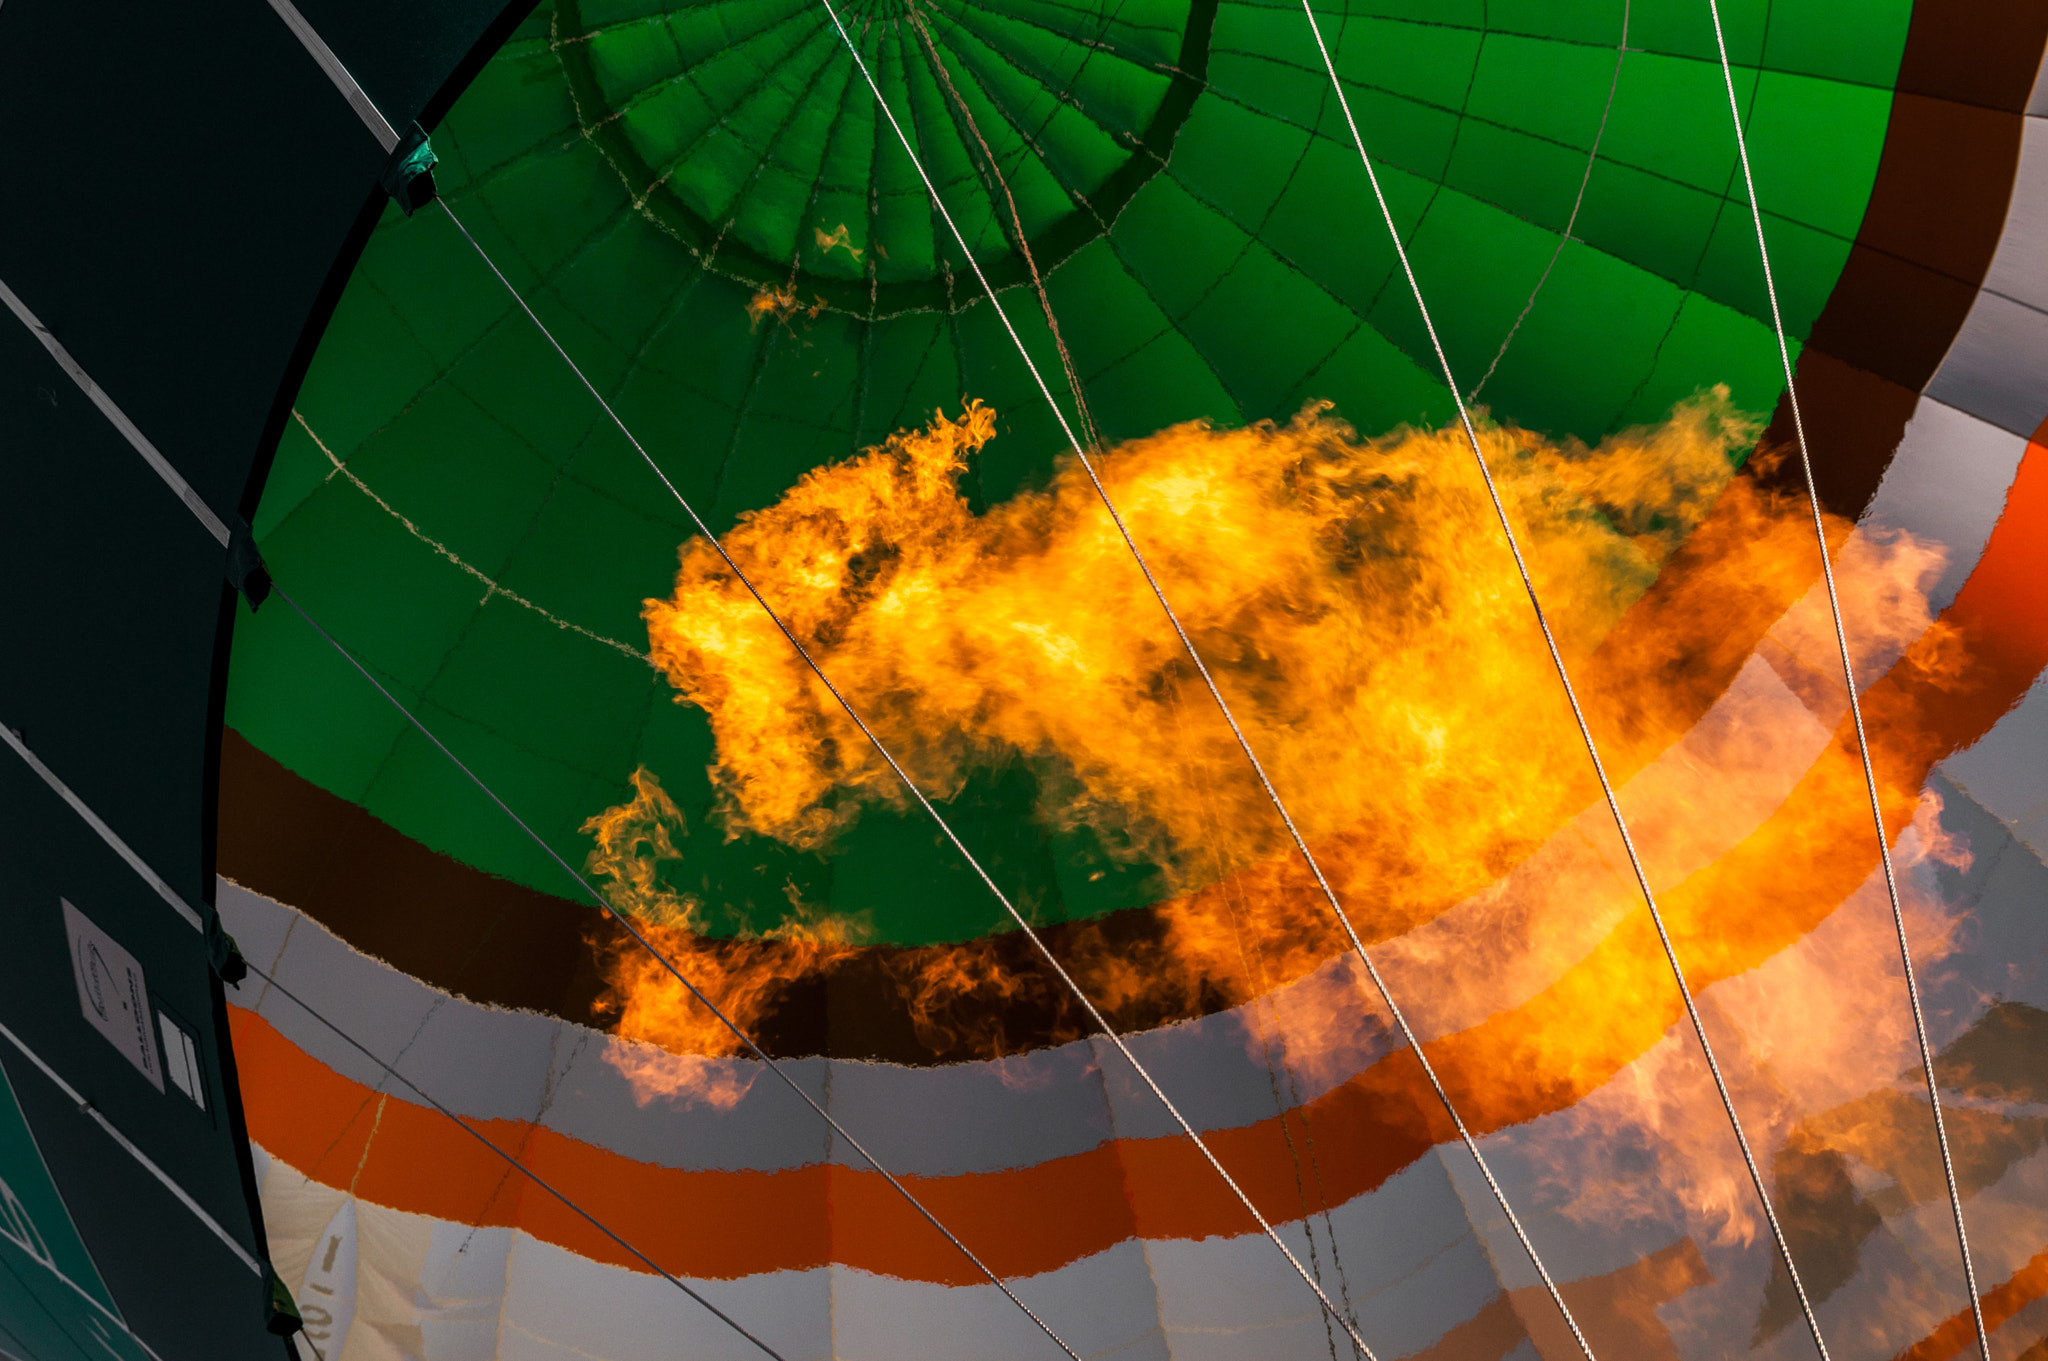 Nikon D90 + Tamron SP AF 17-50mm F2.8 XR Di II VC LD Aspherical (IF) sample photo. Balloon and fire photography